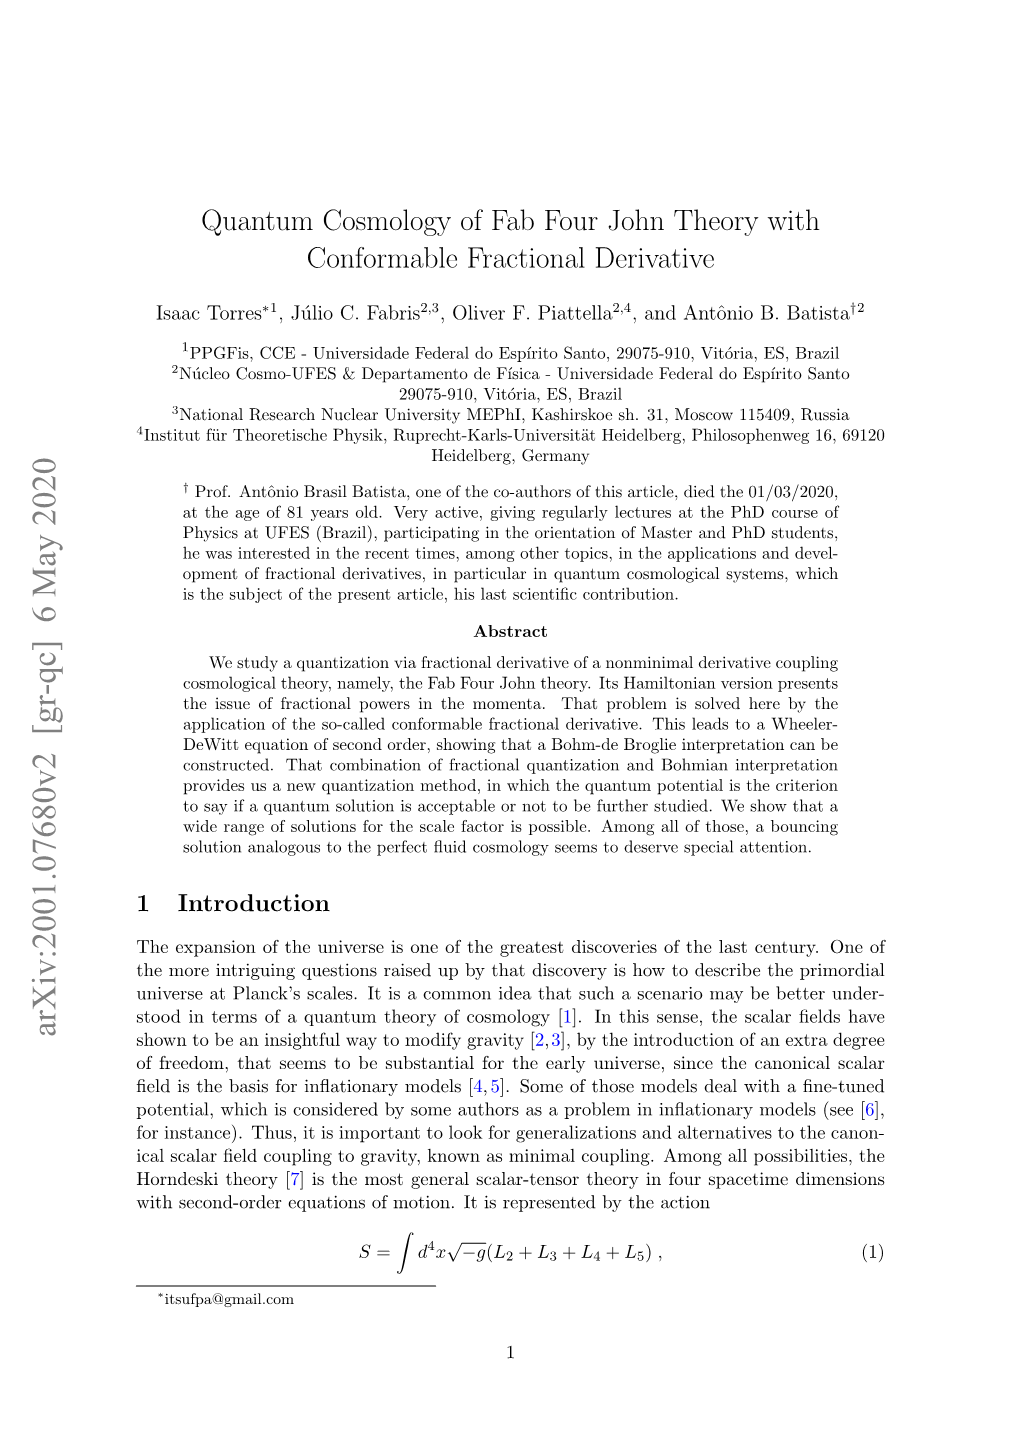 Quantum Cosmology of Fab Four John Theory with Conformable Fractional Derivative